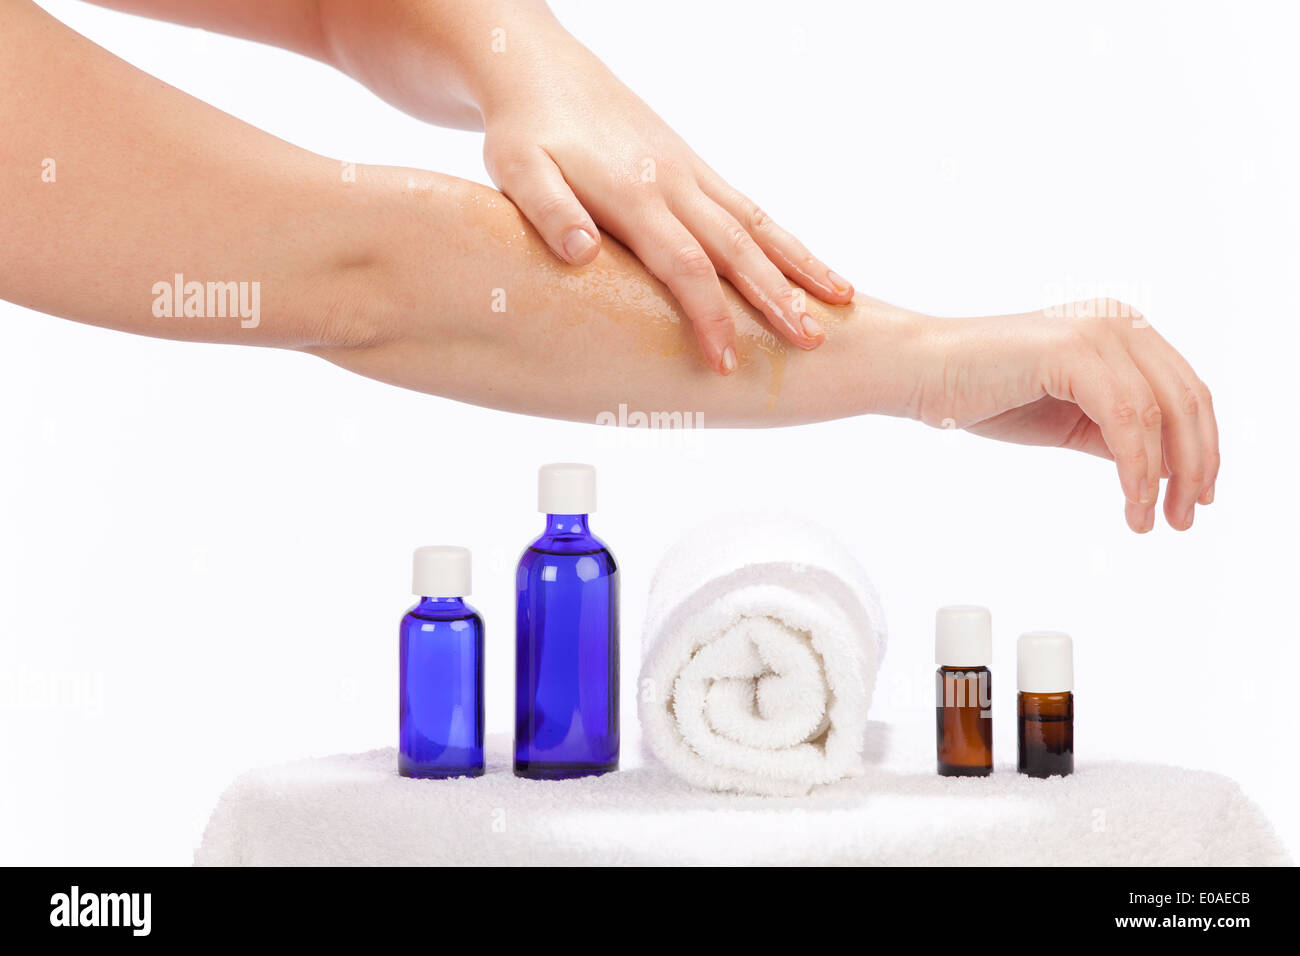 Skin care with essential oils Stock Photo